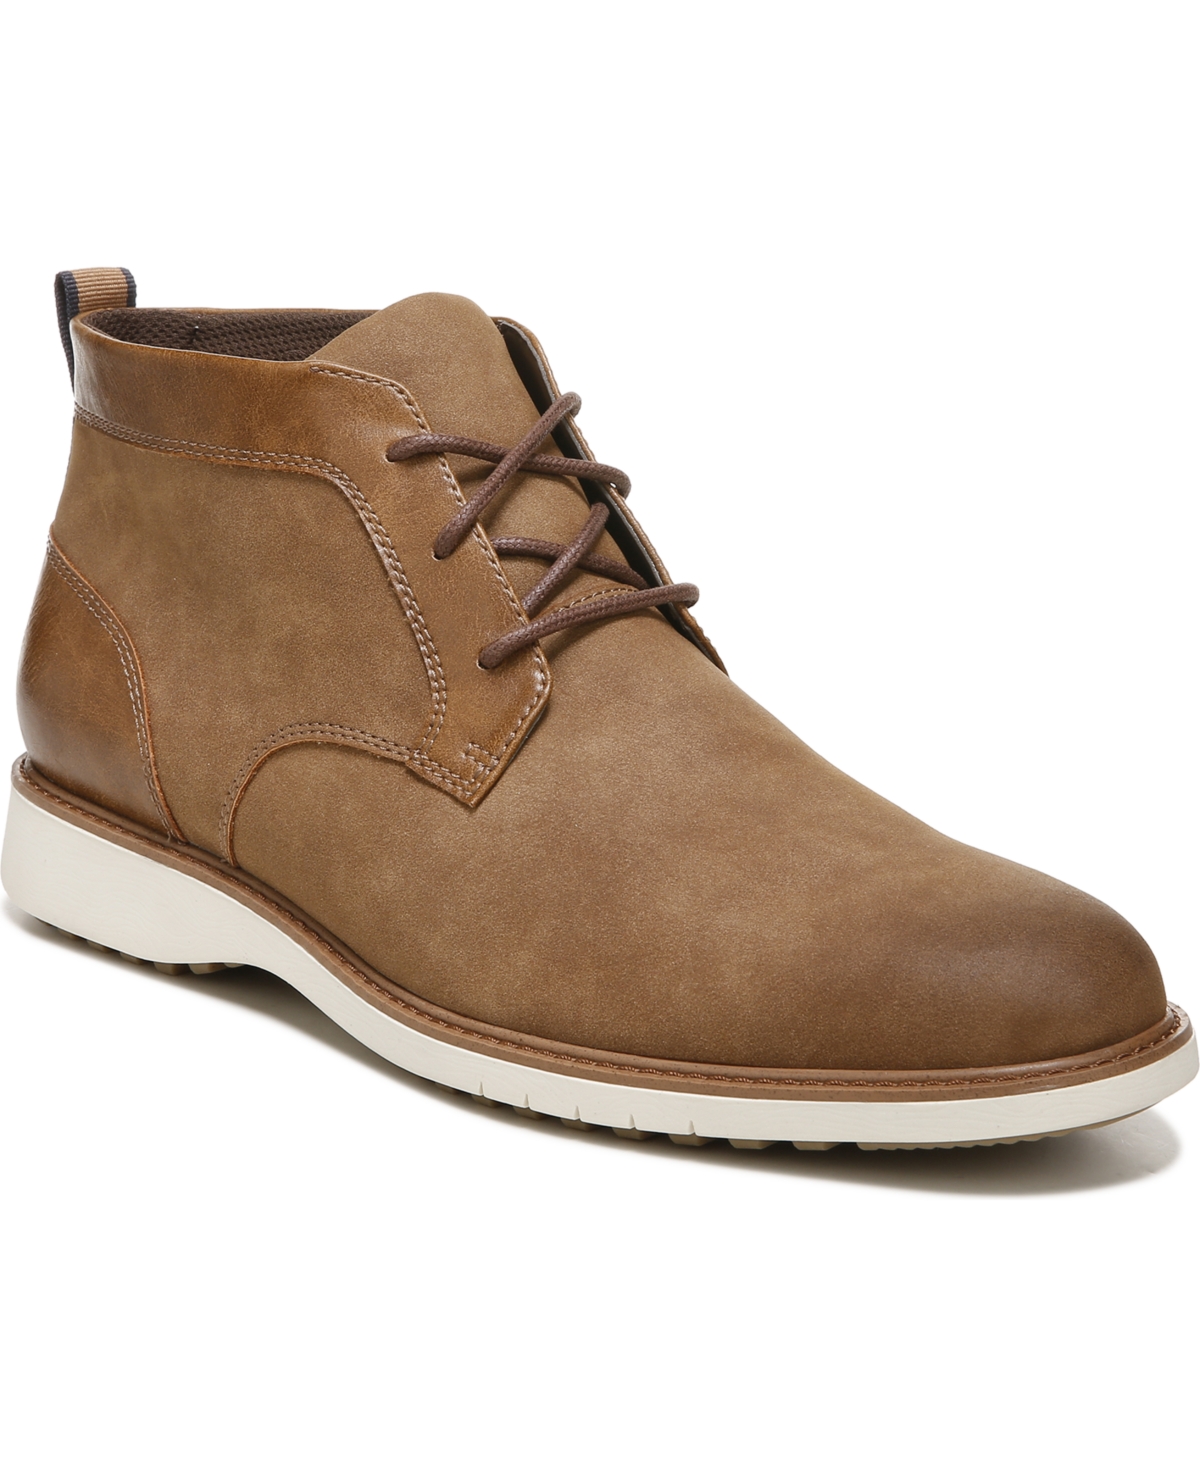 Men's Sync Up Chukka Boots - Chestnut Brown Synthetic